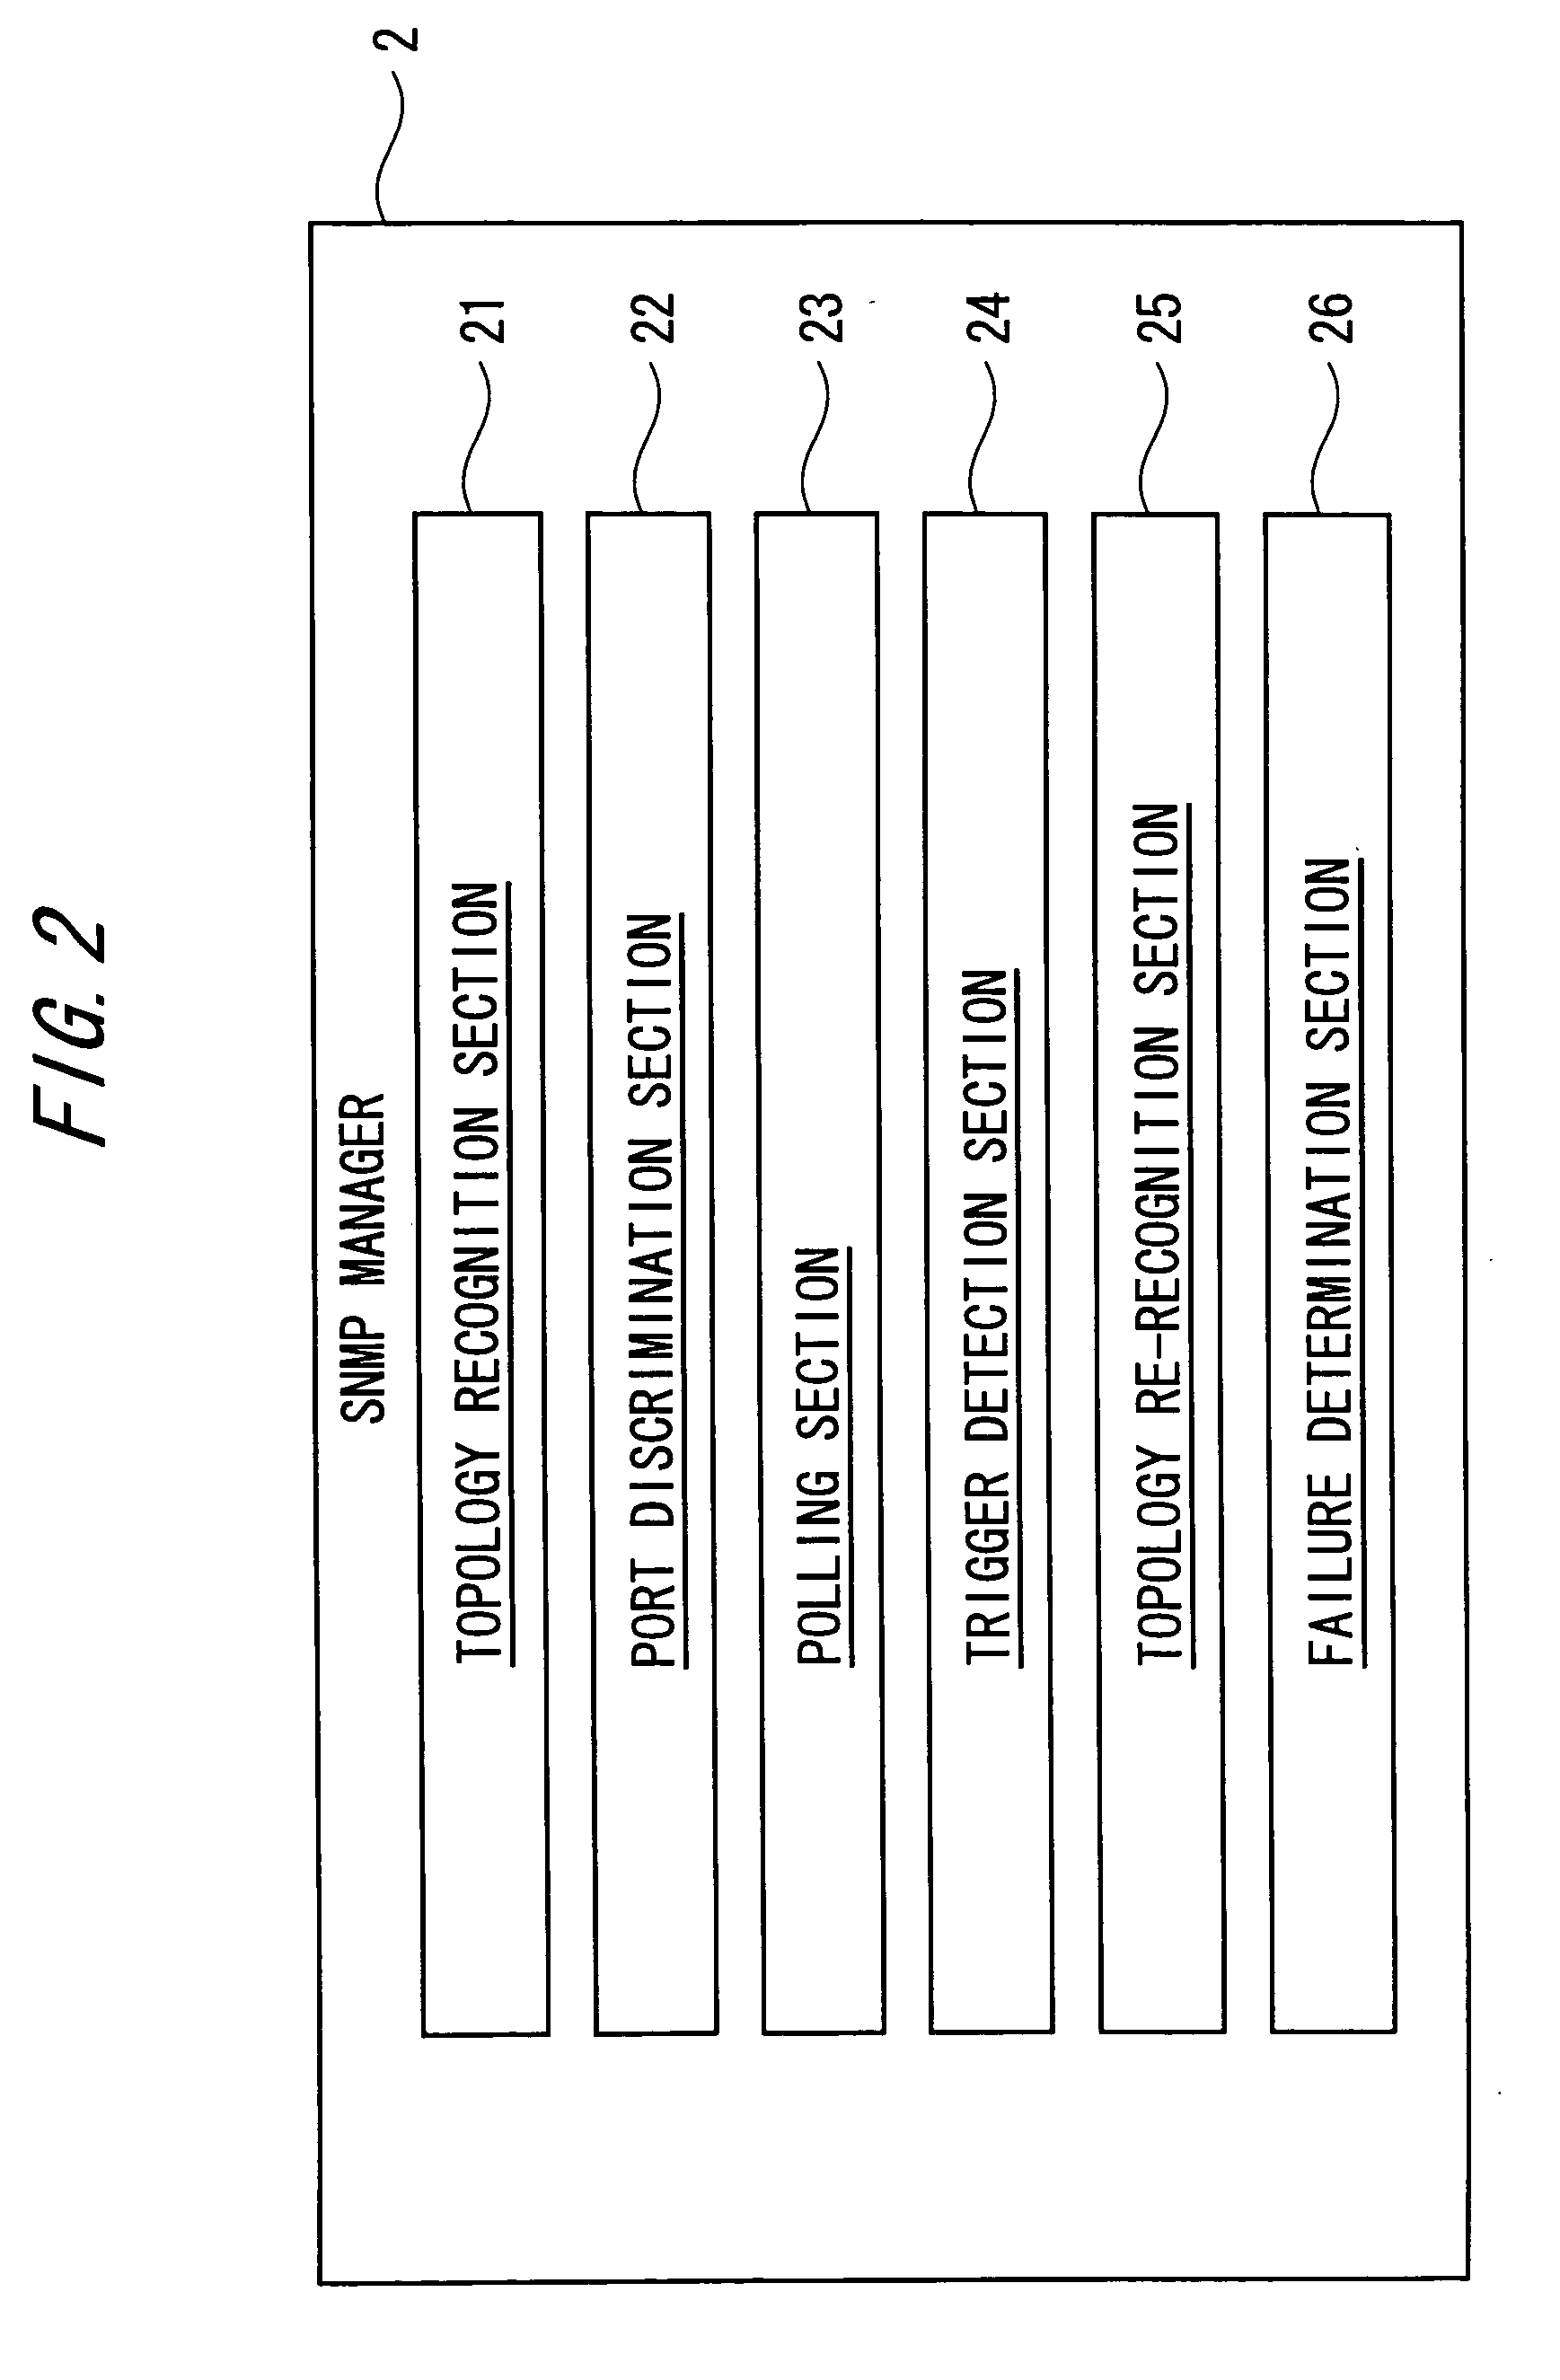 Layer 2 loop detection system